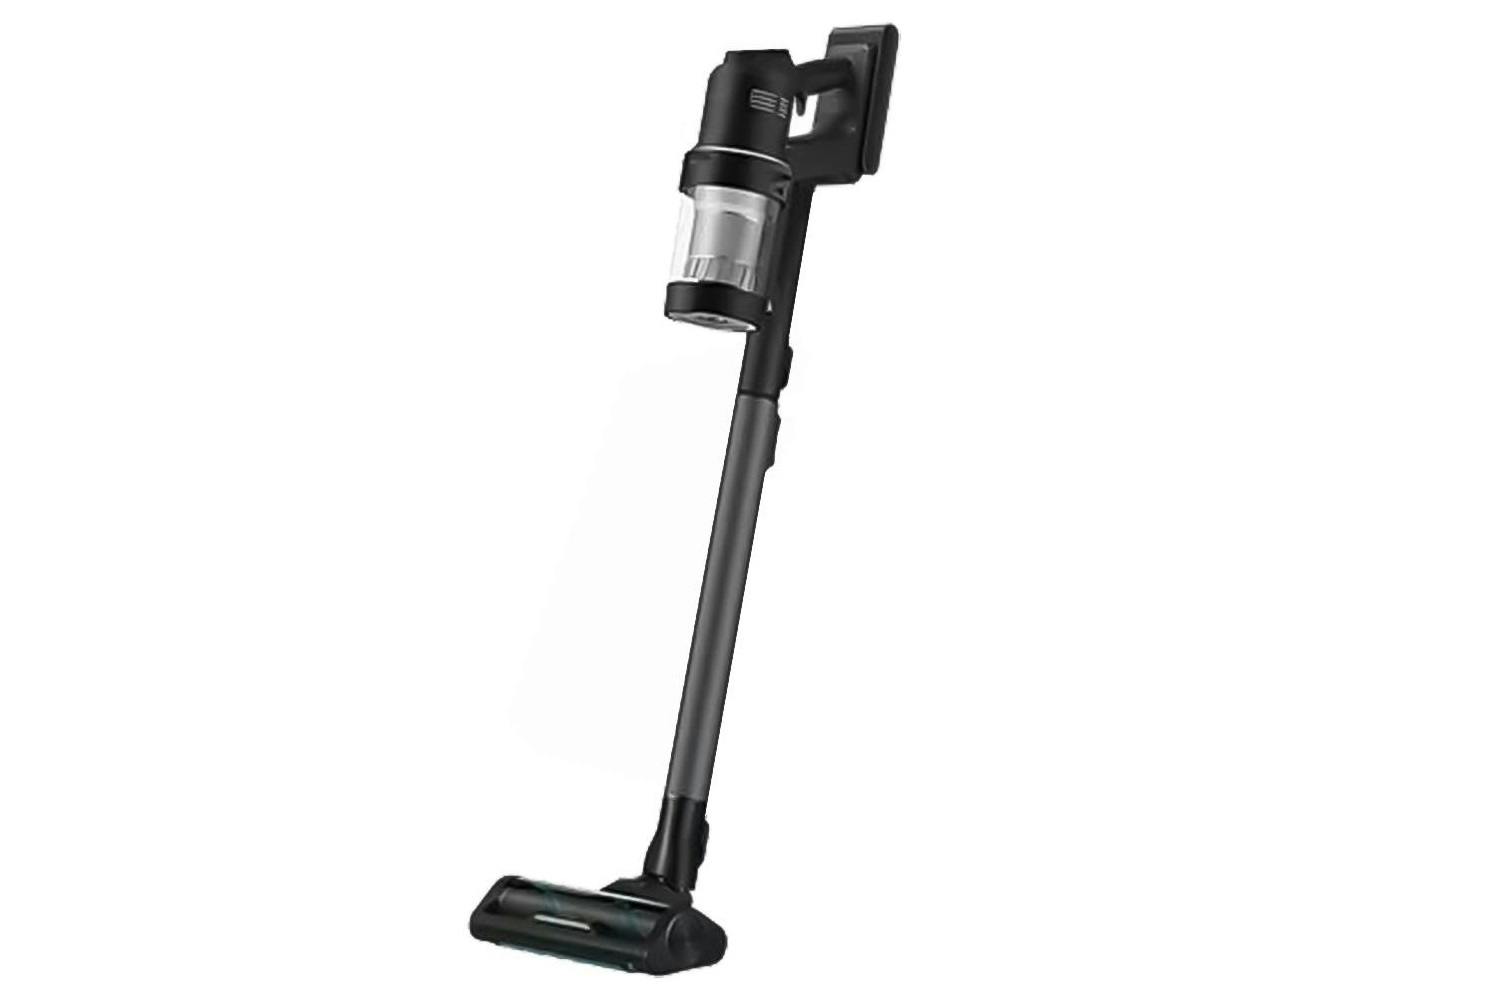 Samsung Bespoke Jet AI 280W Cordless Stick Vacuum Cleaner with All in One Clean Station| VS28C9784QK/EU